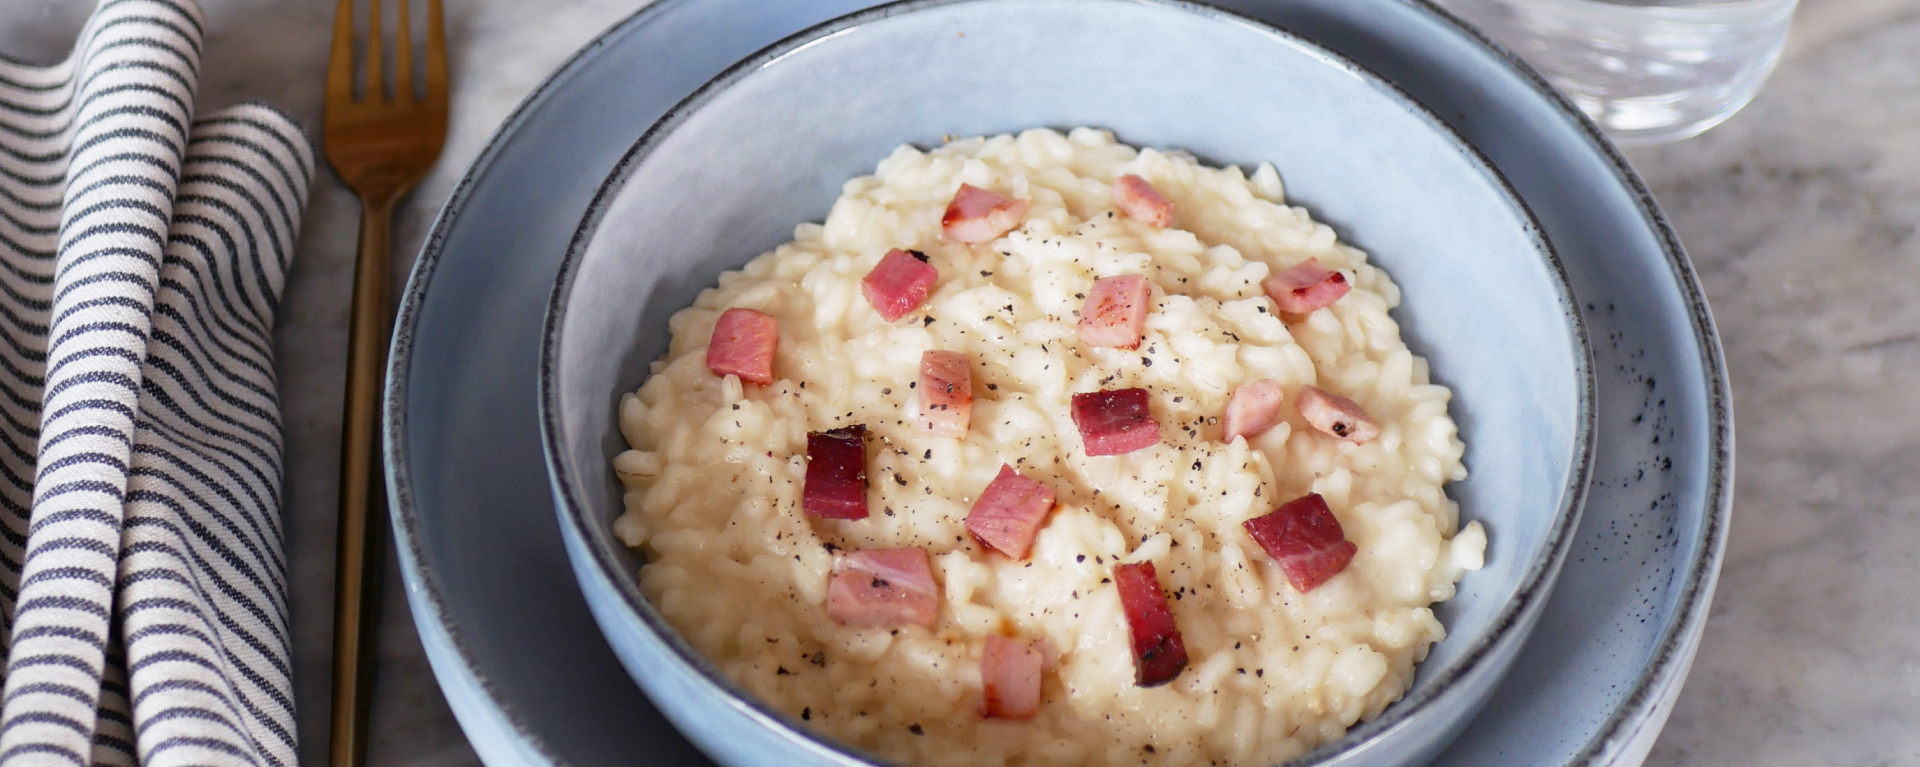 Risotto with creamy cheese